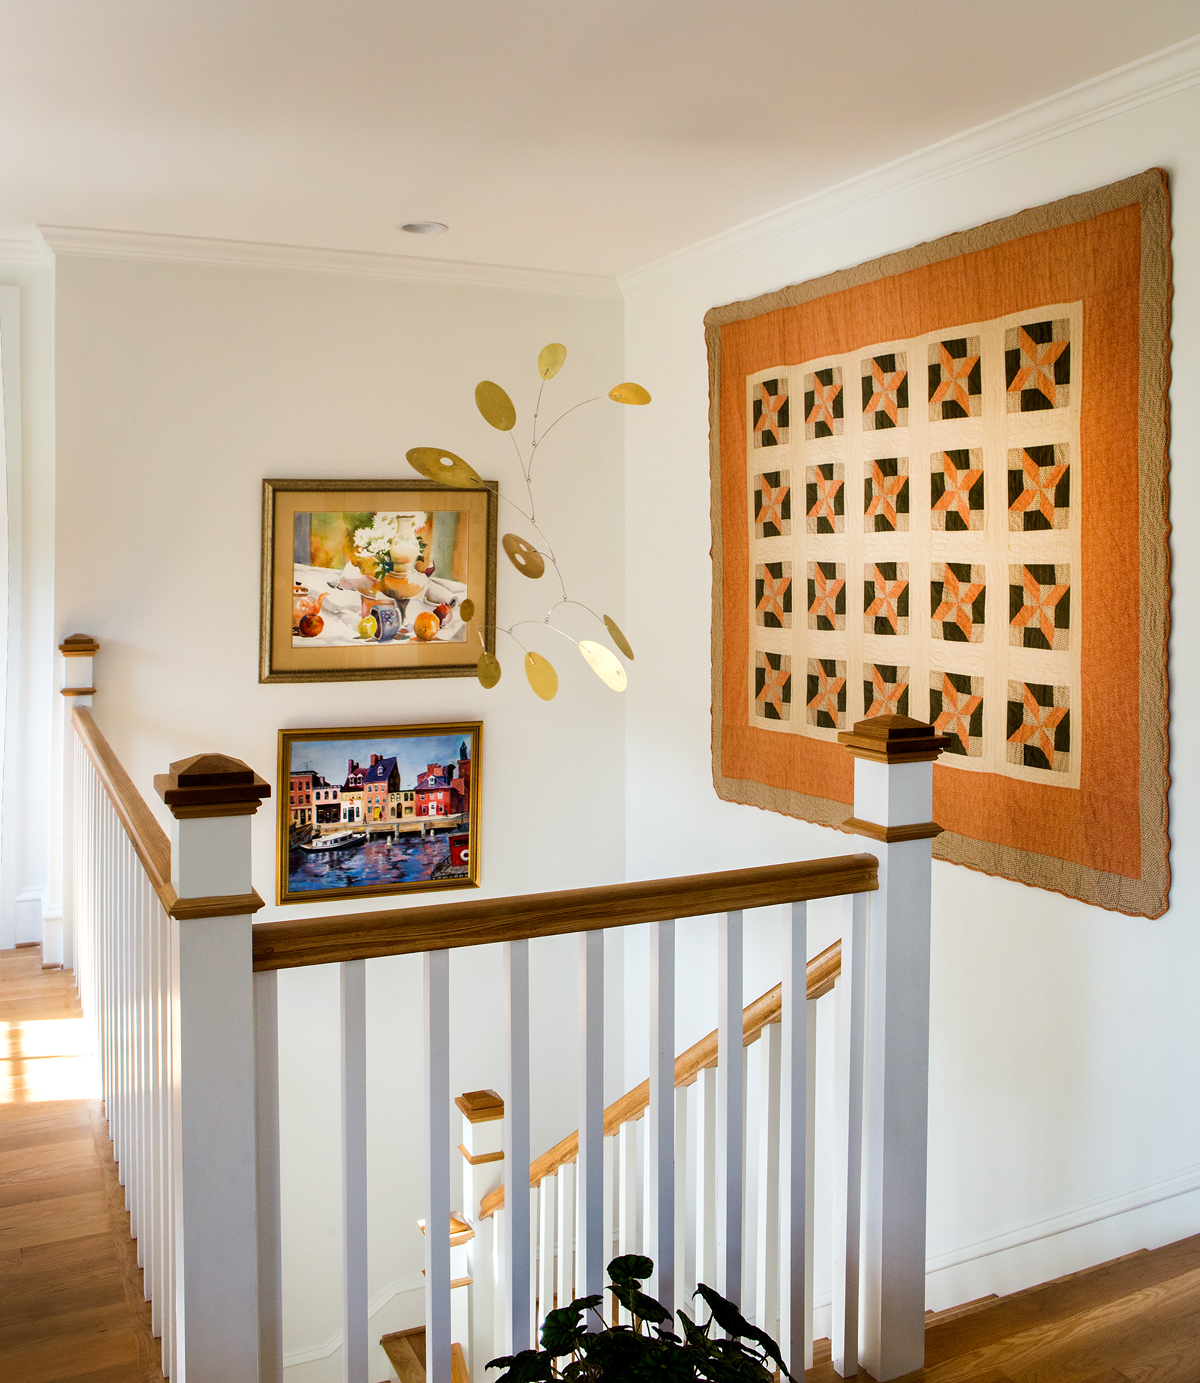 The upstairs stairwell has a warm feel with the addition of artwork and a quilt hanging on the walls as well as a mobile from the ceiling. Linda was deliberate in her placement of items, giving the space a three-dimensional spirit.